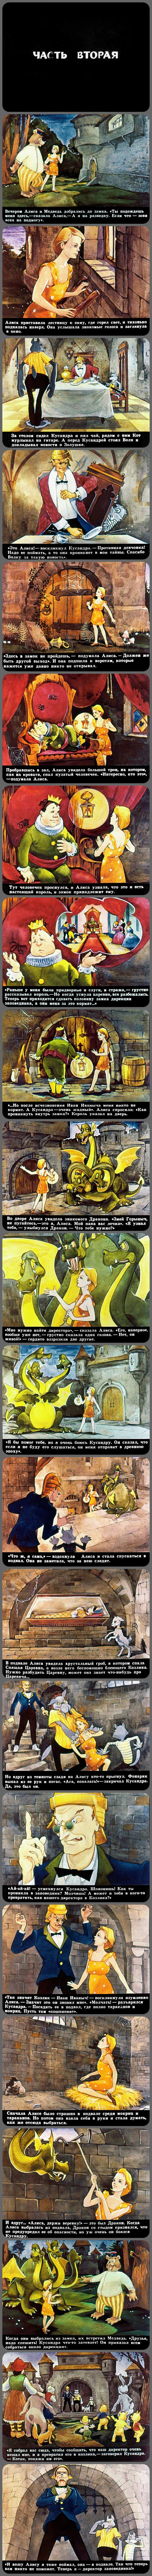 Preserve of Tales (1991) Part 2 - the USSR, Longpost, Film-strip, Past, Picture with text, Kir Bulychev, Filmstrips